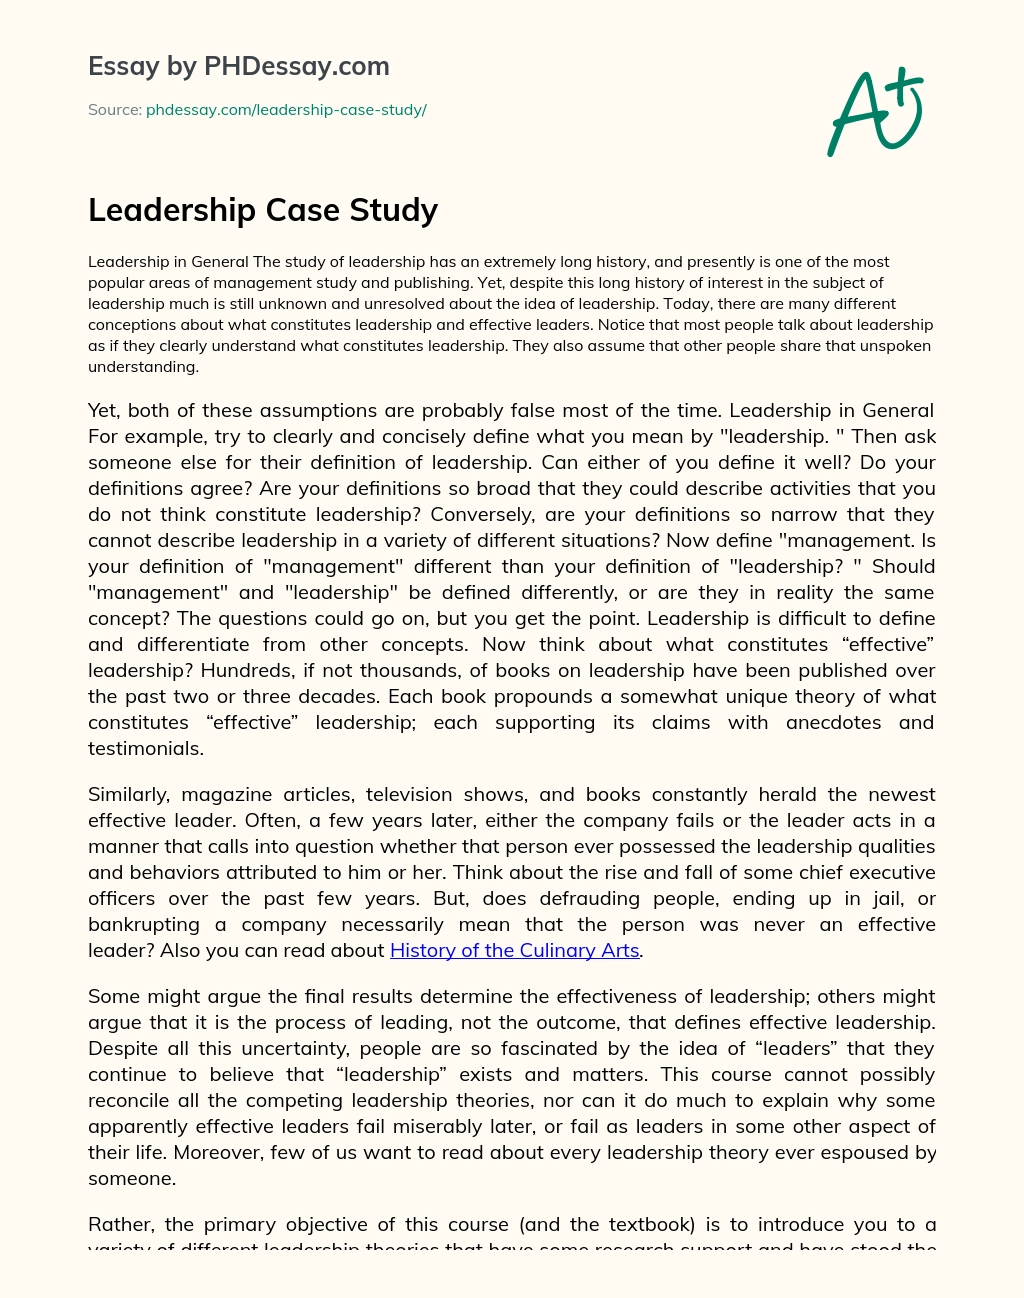 The Complexity of Defining Leadership and Management essay